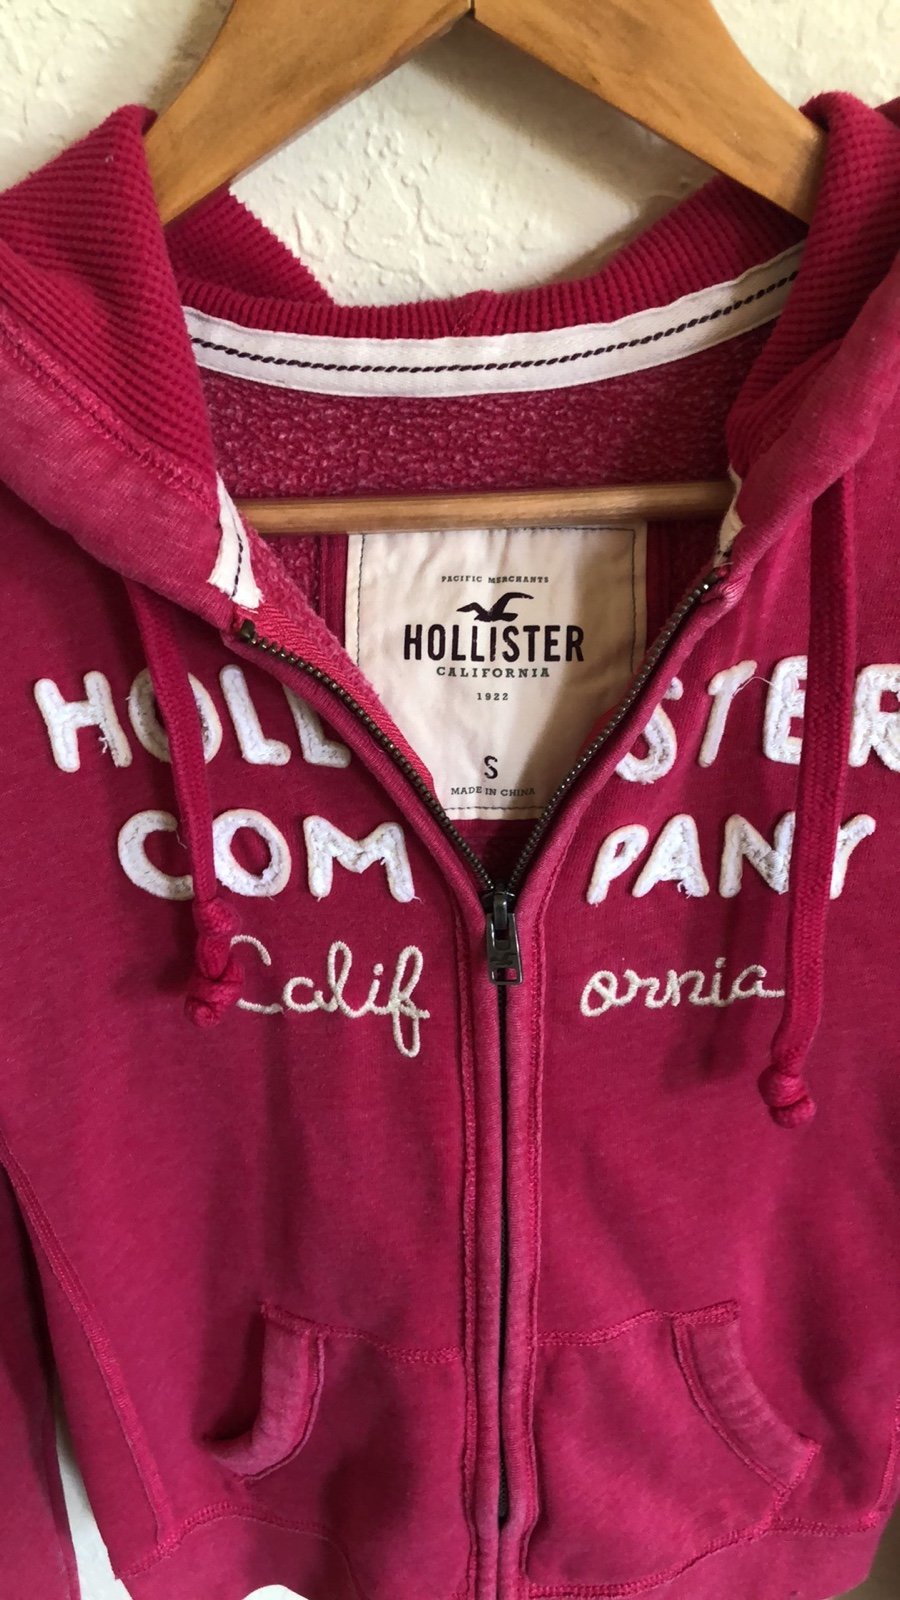 Gorgeous Hollister woman’s zip hoodie pH4gNY2Bw outlet online shop